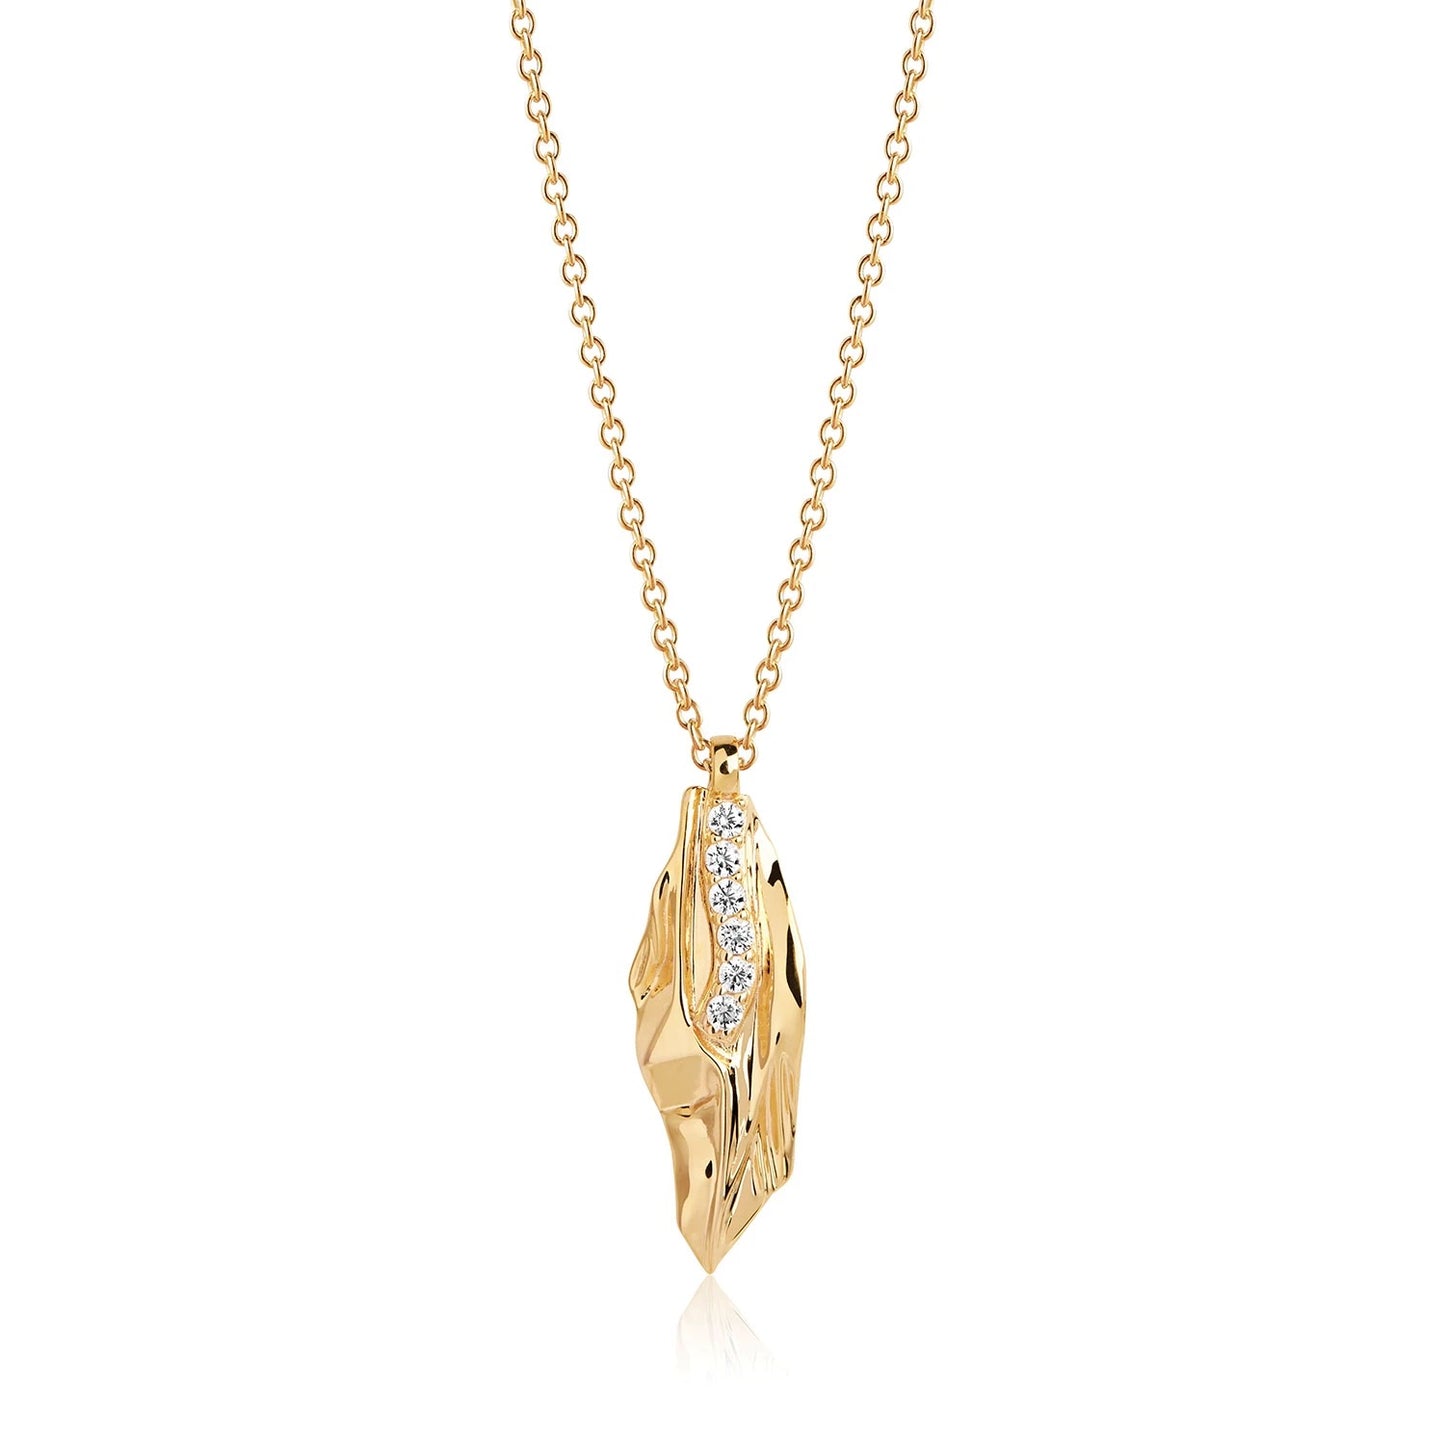 Sif Jakobs Vulcanello Pendant - 18ct Gold Plated Sterling Silver with White Zirconia